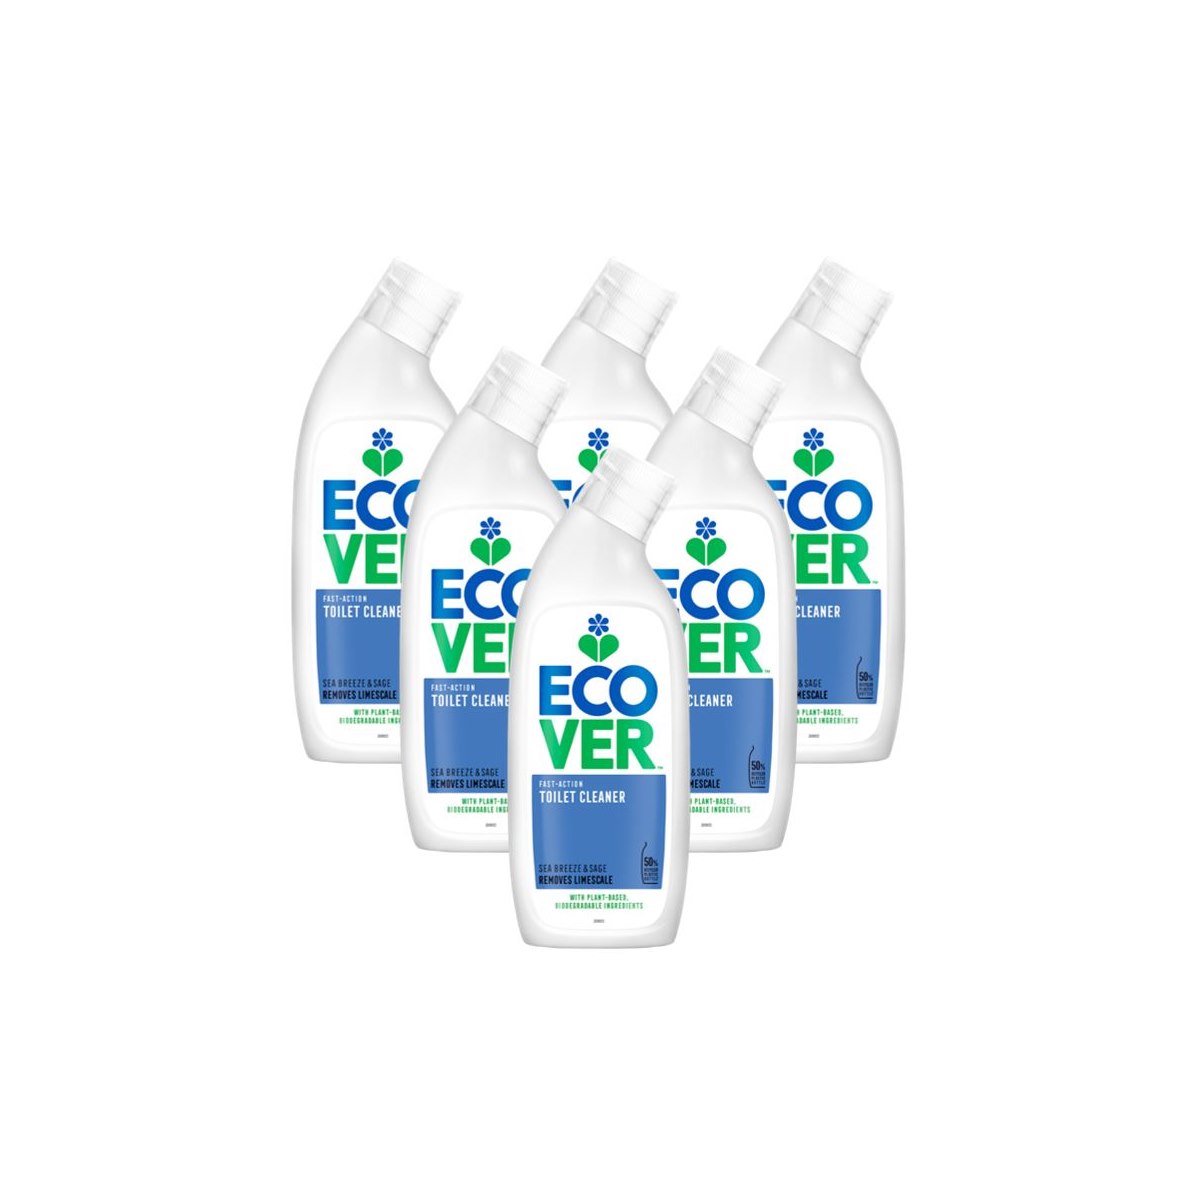 Case of 6 x Ecover Fast Action Toilet Cleaner Sea Breeze and Sage 750ml